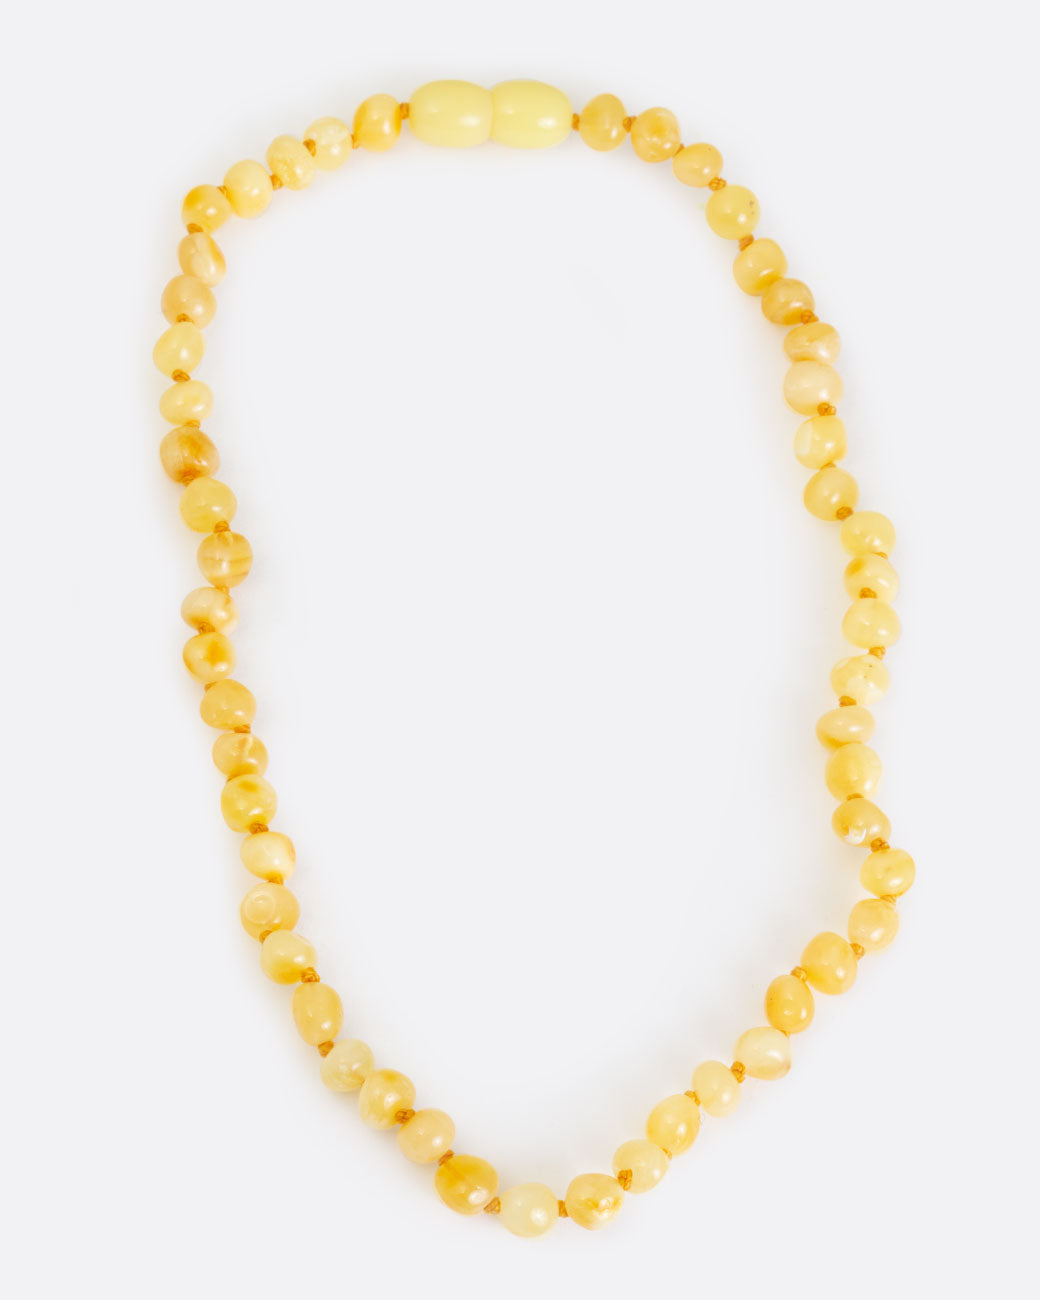 Yellow amber teething necklace, shown laying flat.